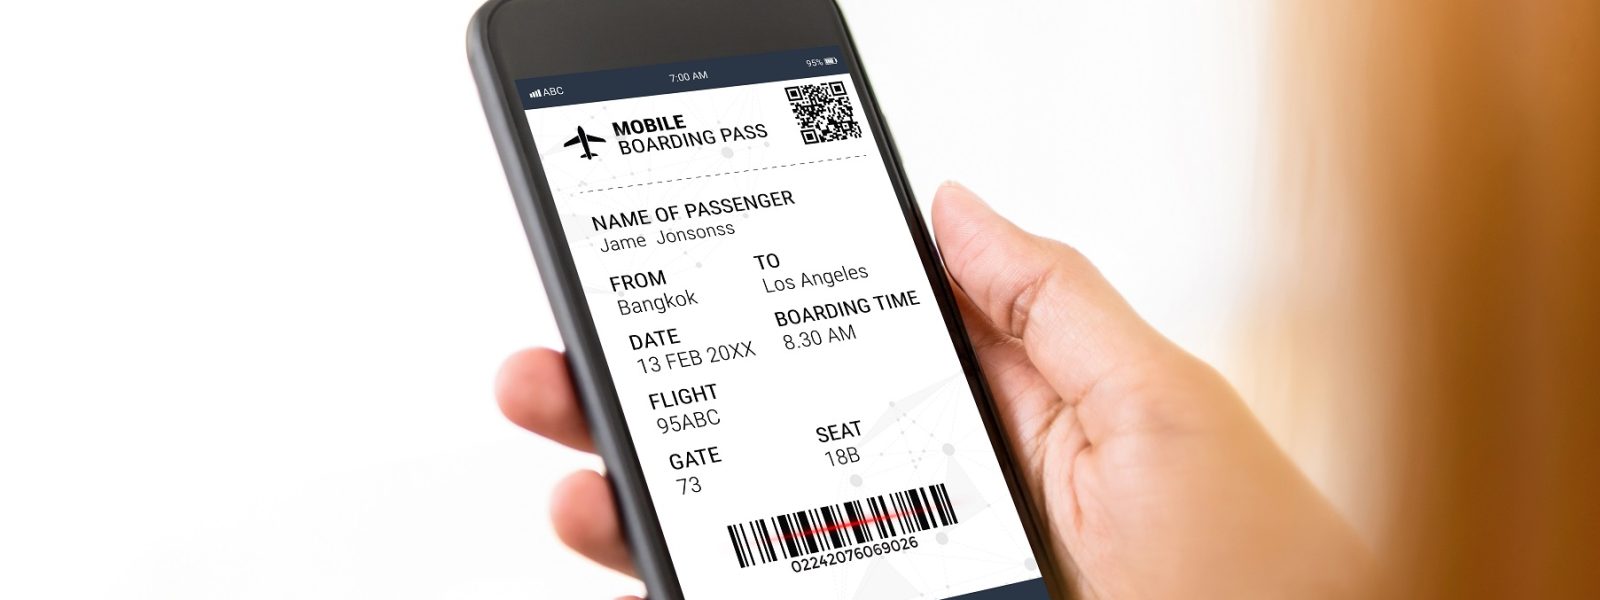 Passenger looking at electronic boarding pass on smartphone scre